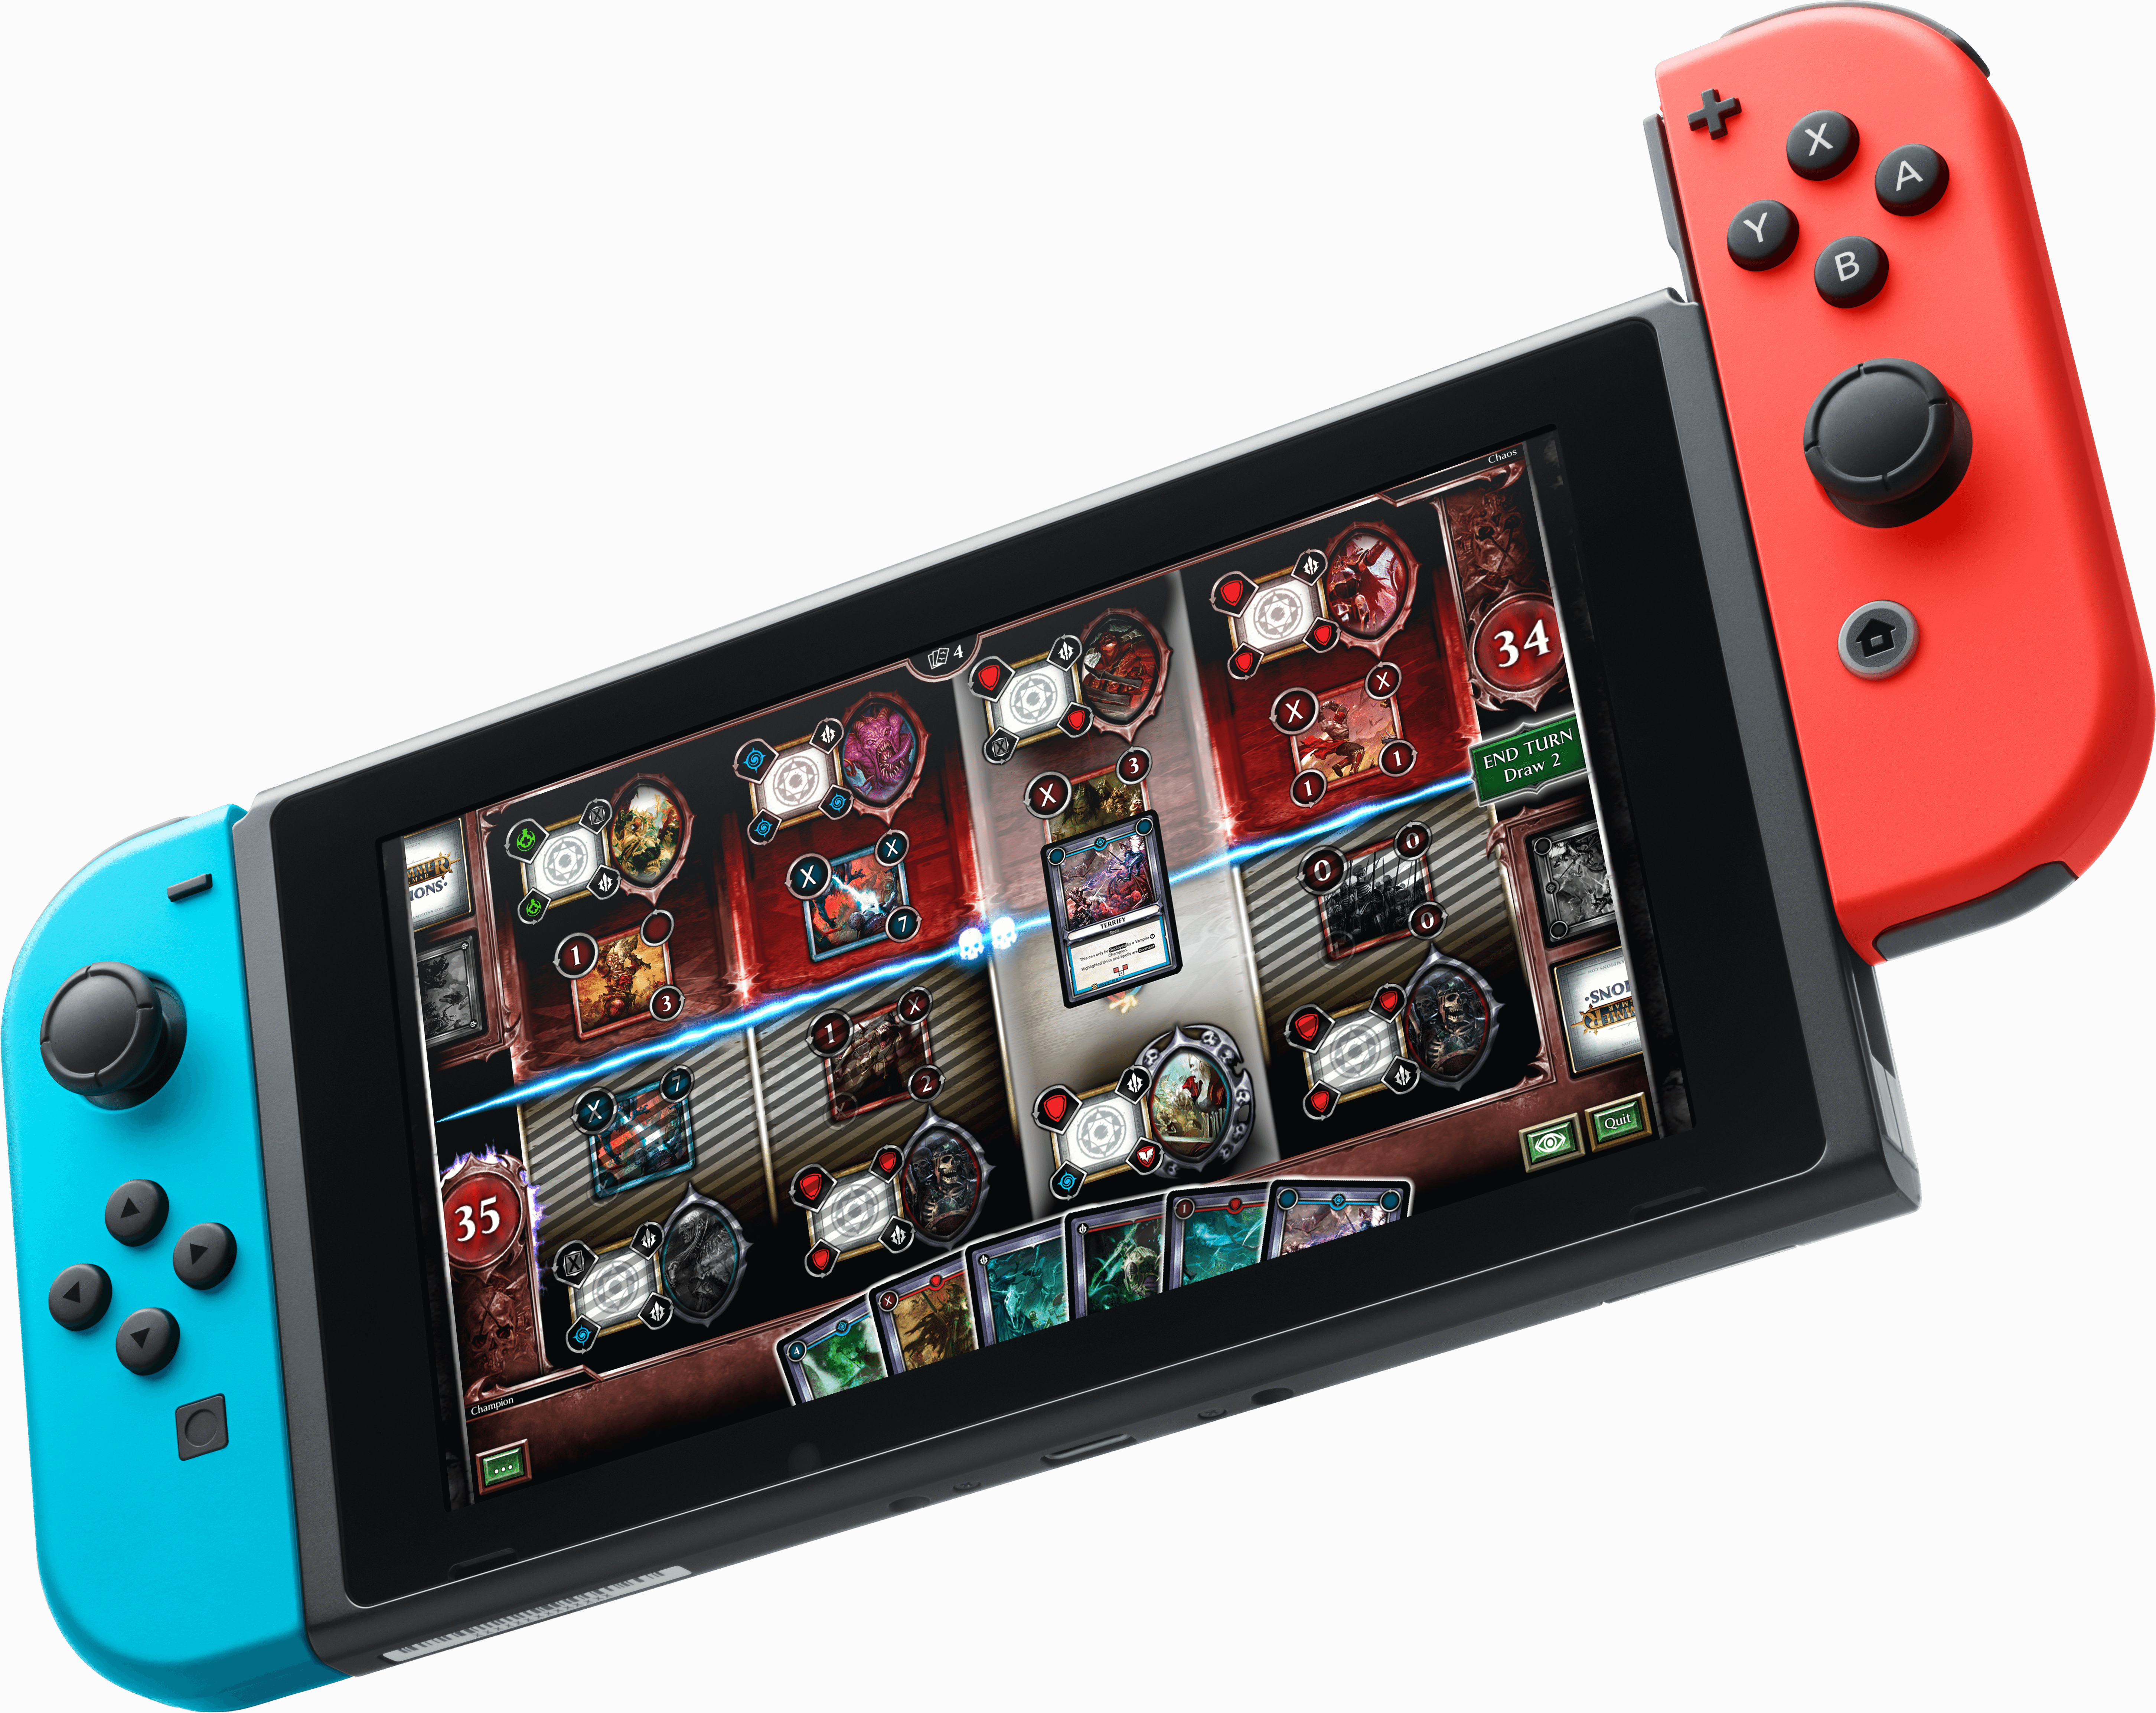 http://www.cosmocover.com/wp-content/uploads/2019/04/Nintendo-Switch-Screen-2.png